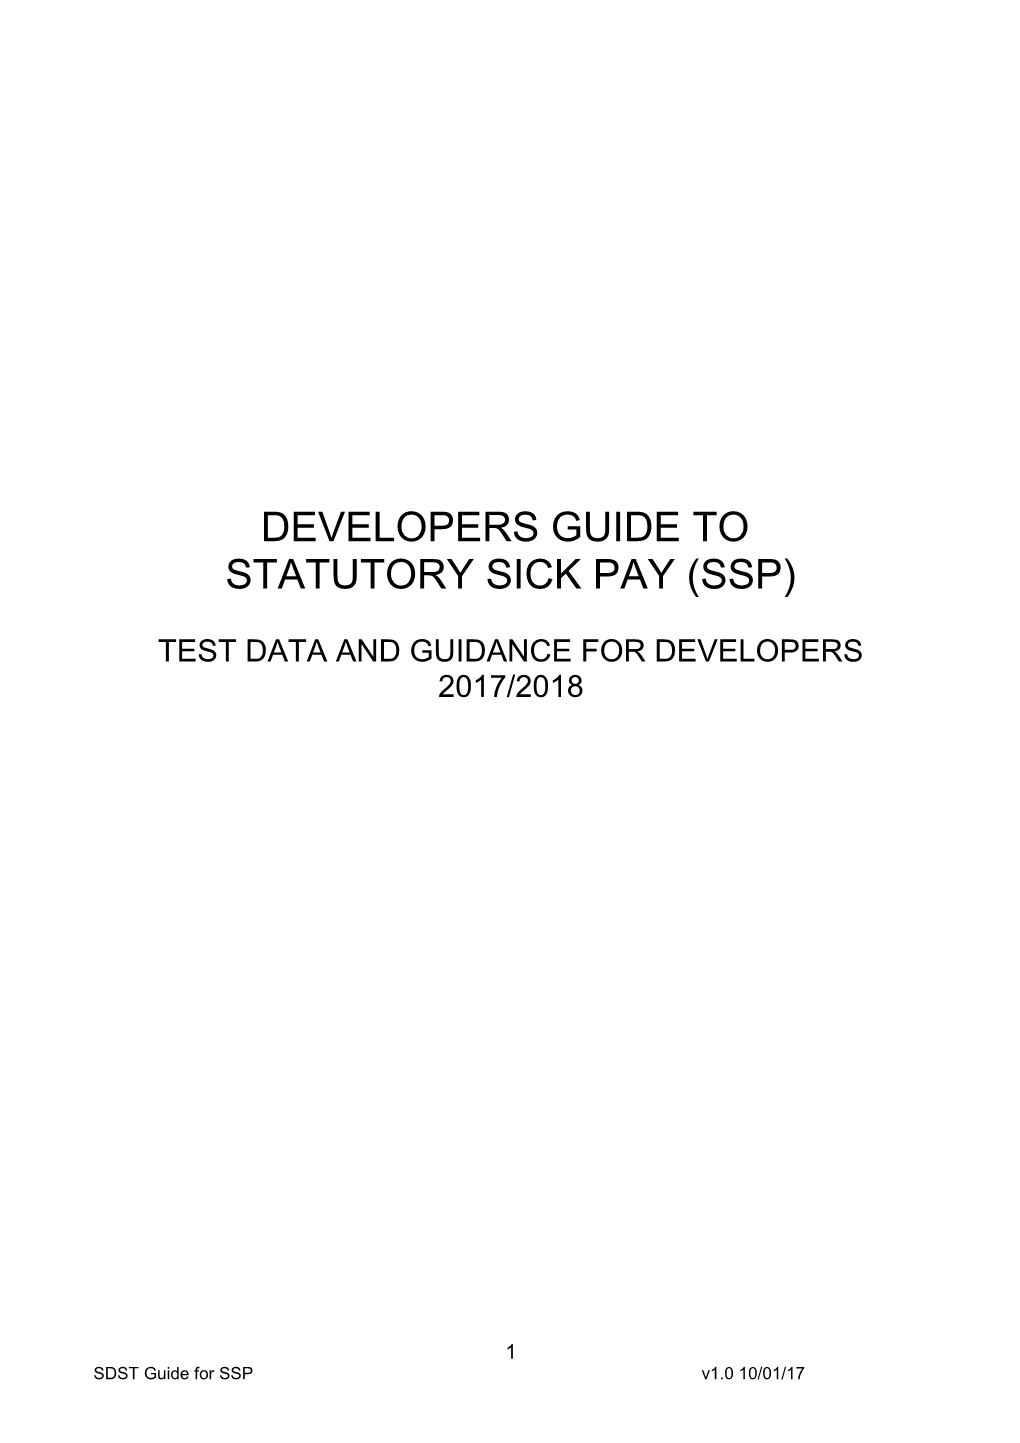 Developers Guide to SSP